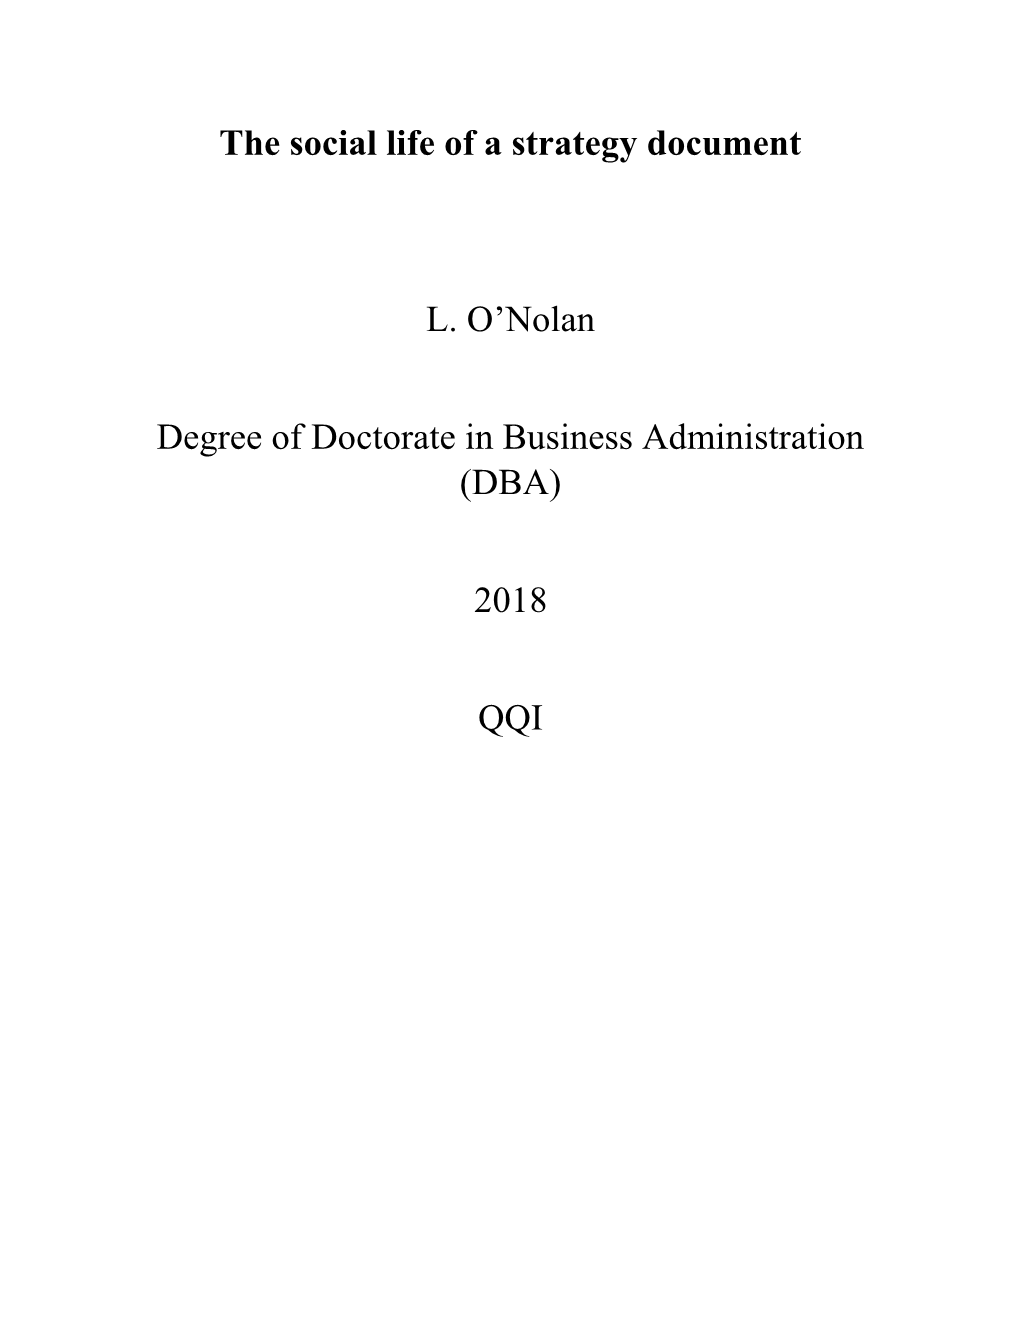 The Social Life of a Strategy Document L. O'nolan Degree of Doctorate In